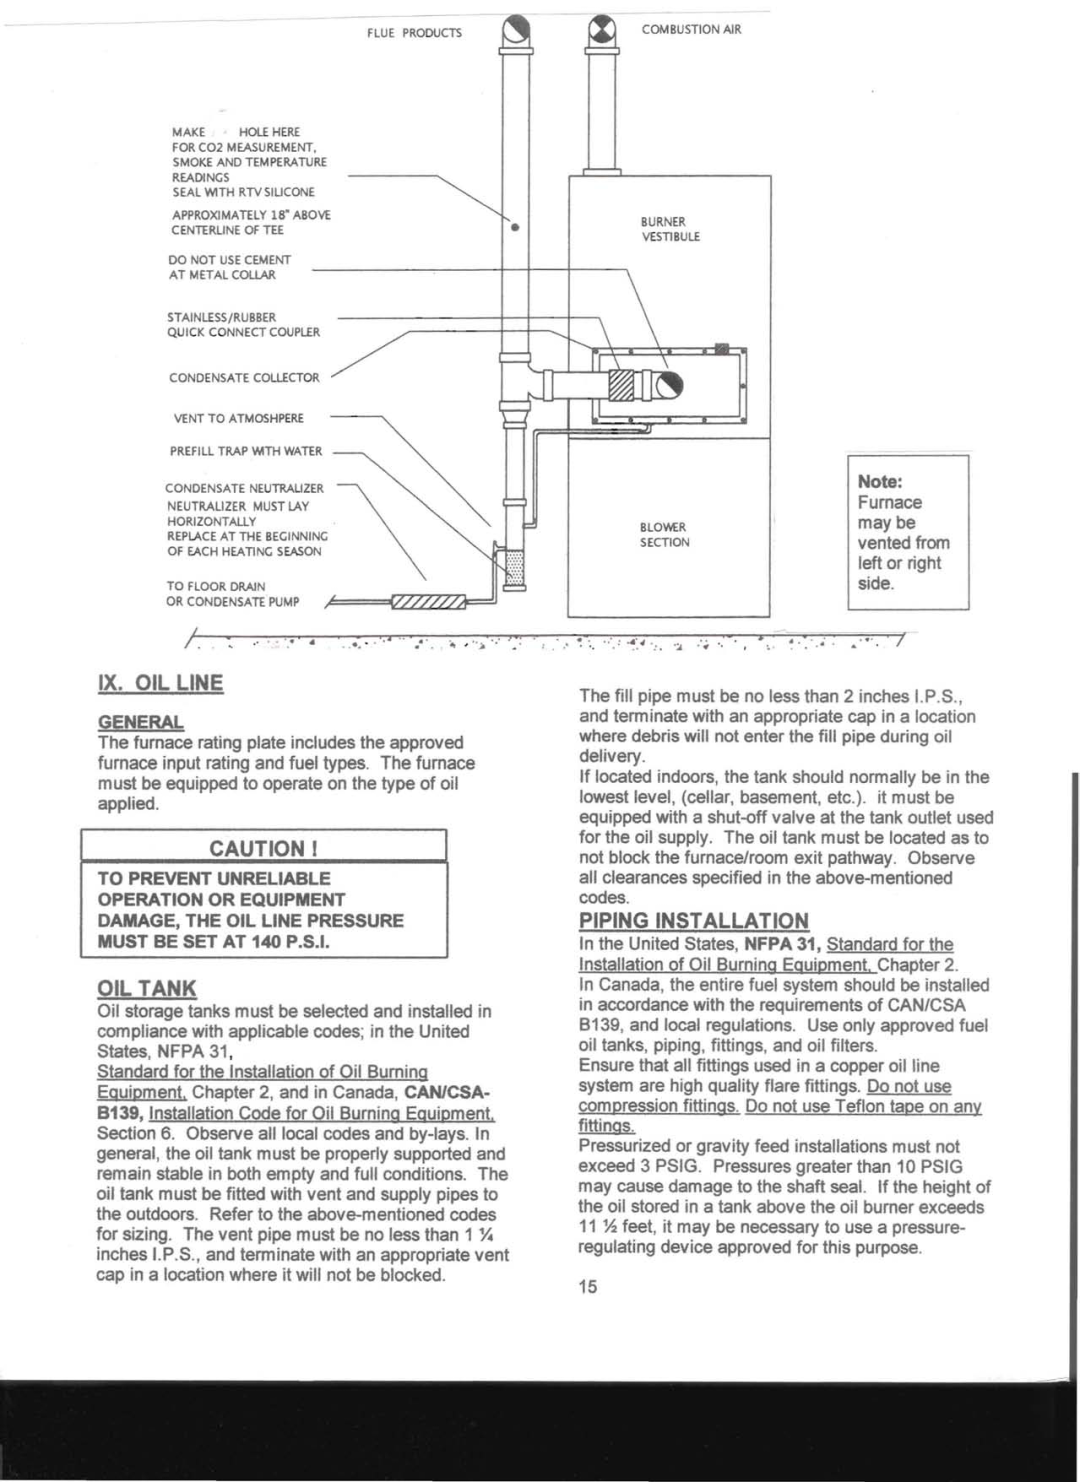 Adams Condensing Oil-Fired Furnace operation manual Ix. Oil Line, Oil Tank, Piping Installation 